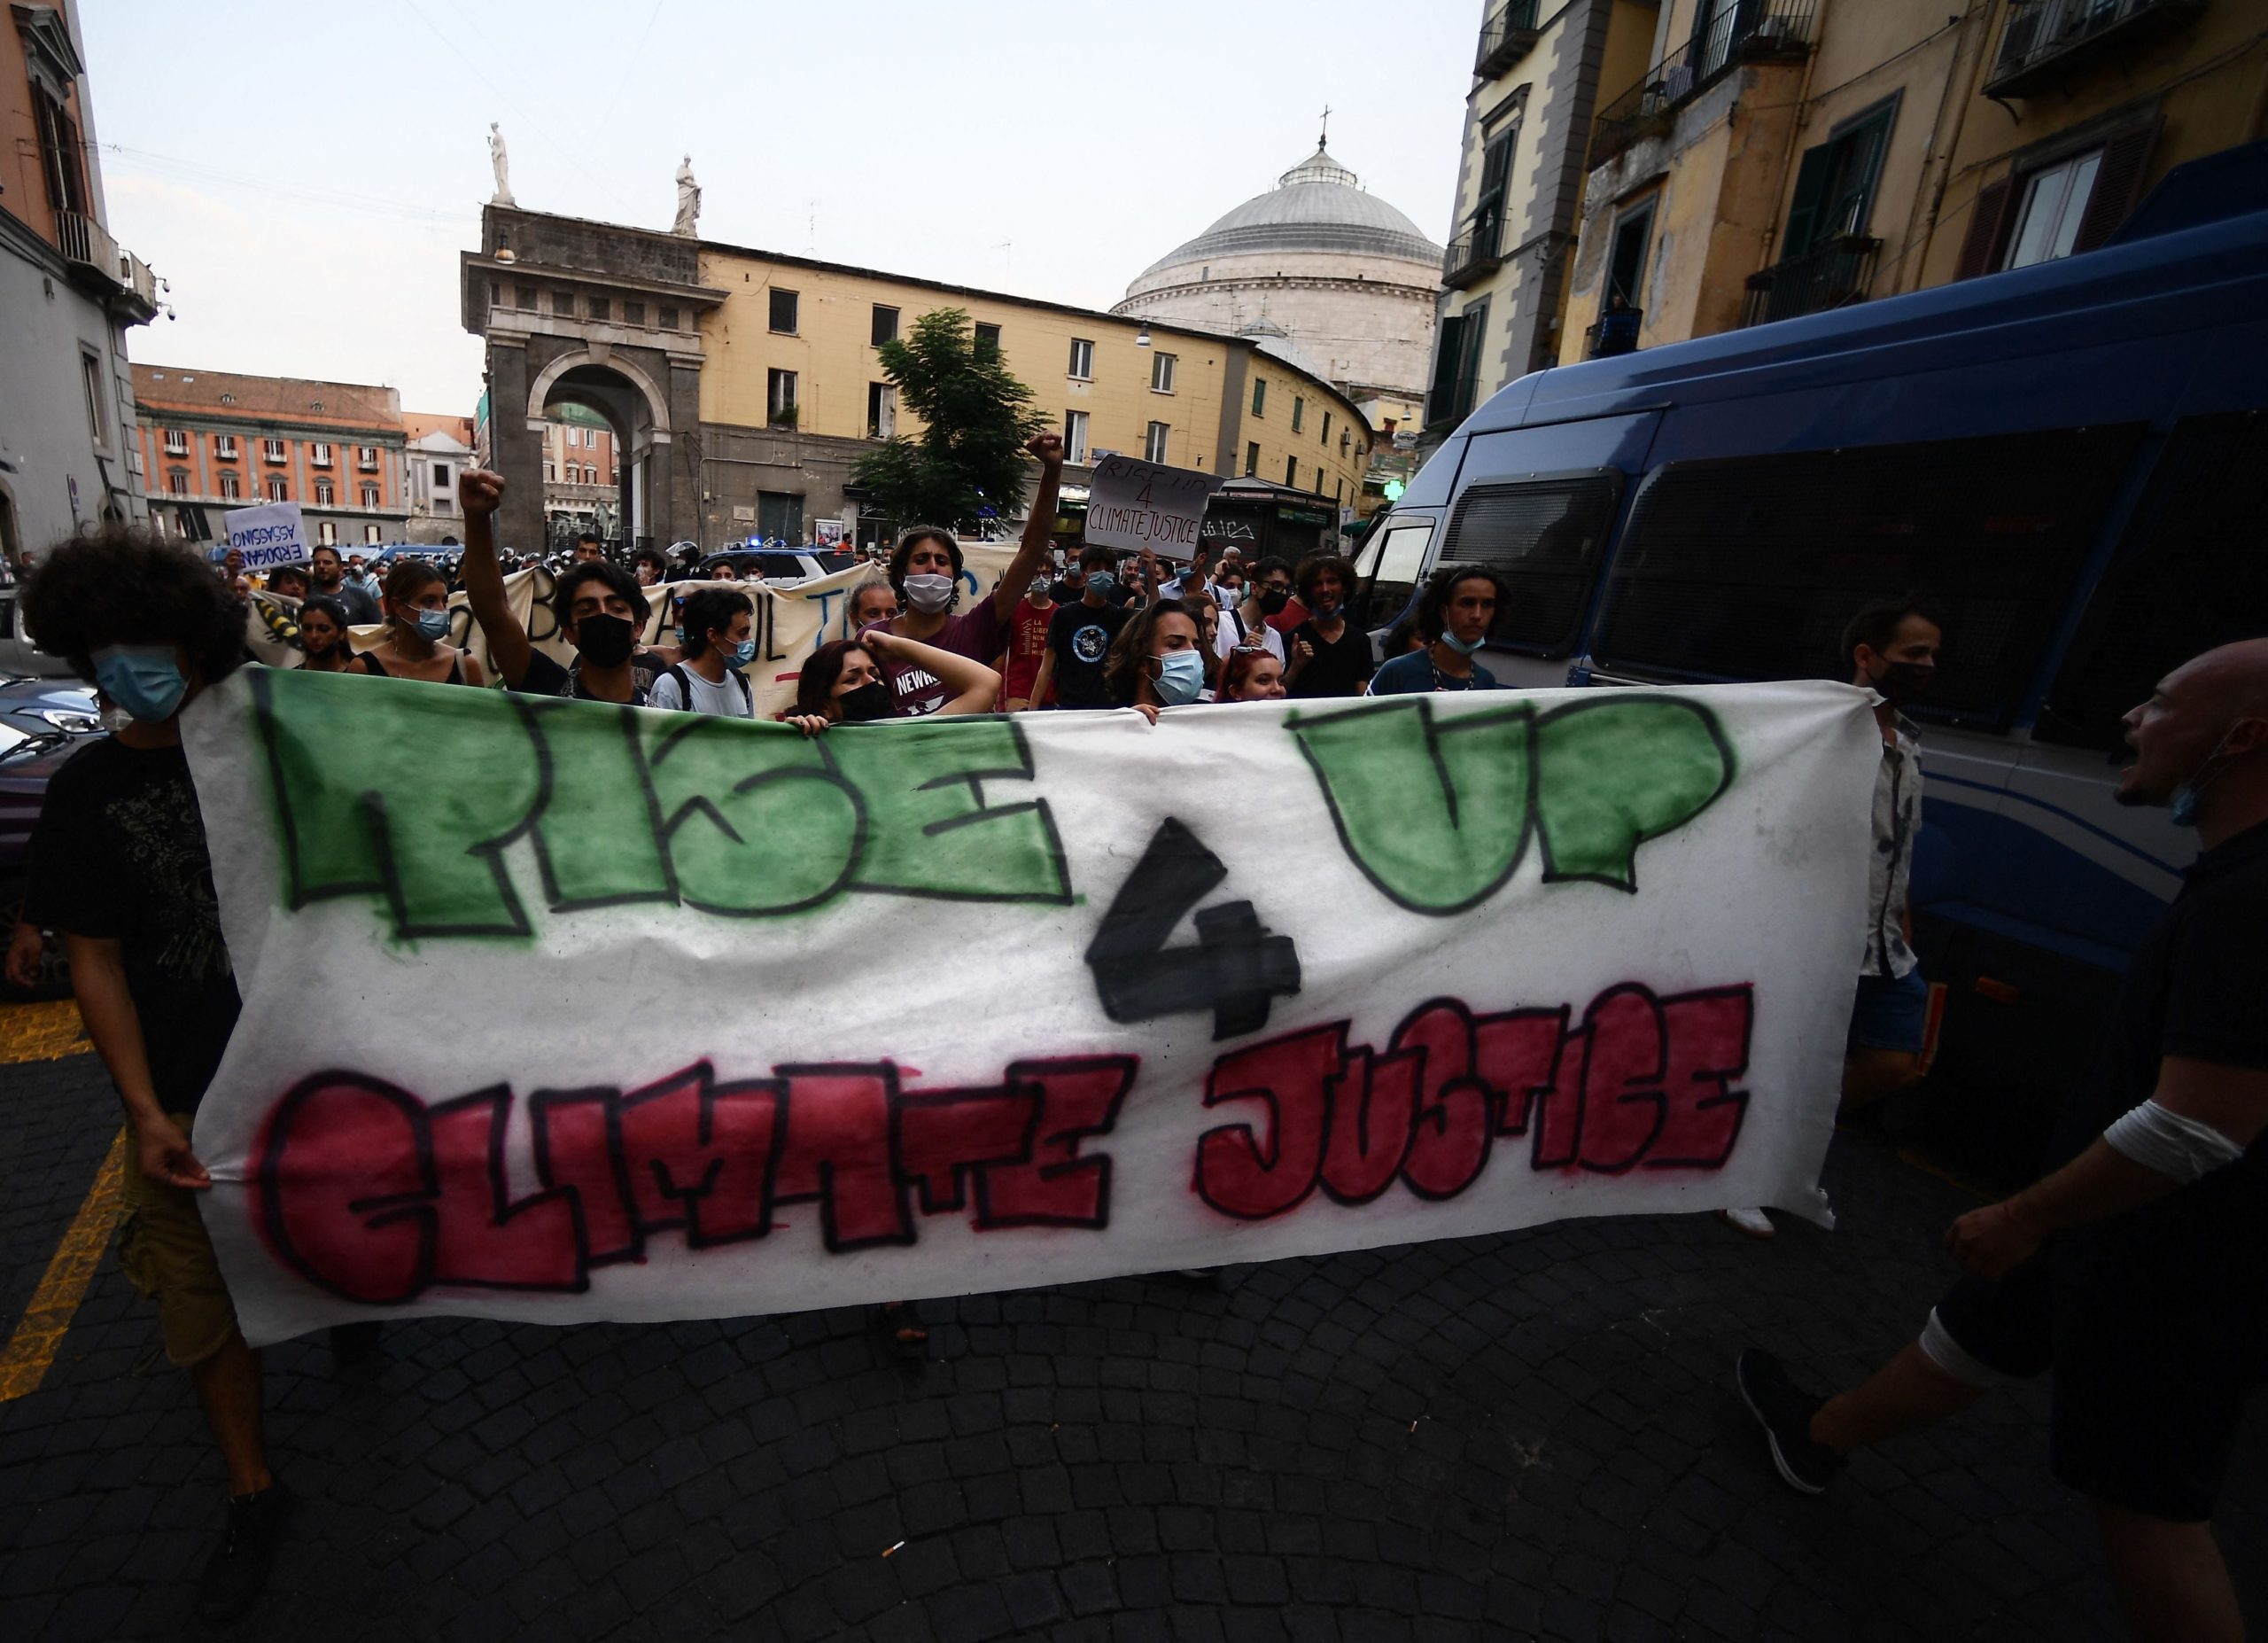 Protesters hold a banner in Naples on July 21, 2021, during a rally against the climate and energy G20 summit starting on July 22, 2021. (Photo: Filippo Monteforte, Getty Images)